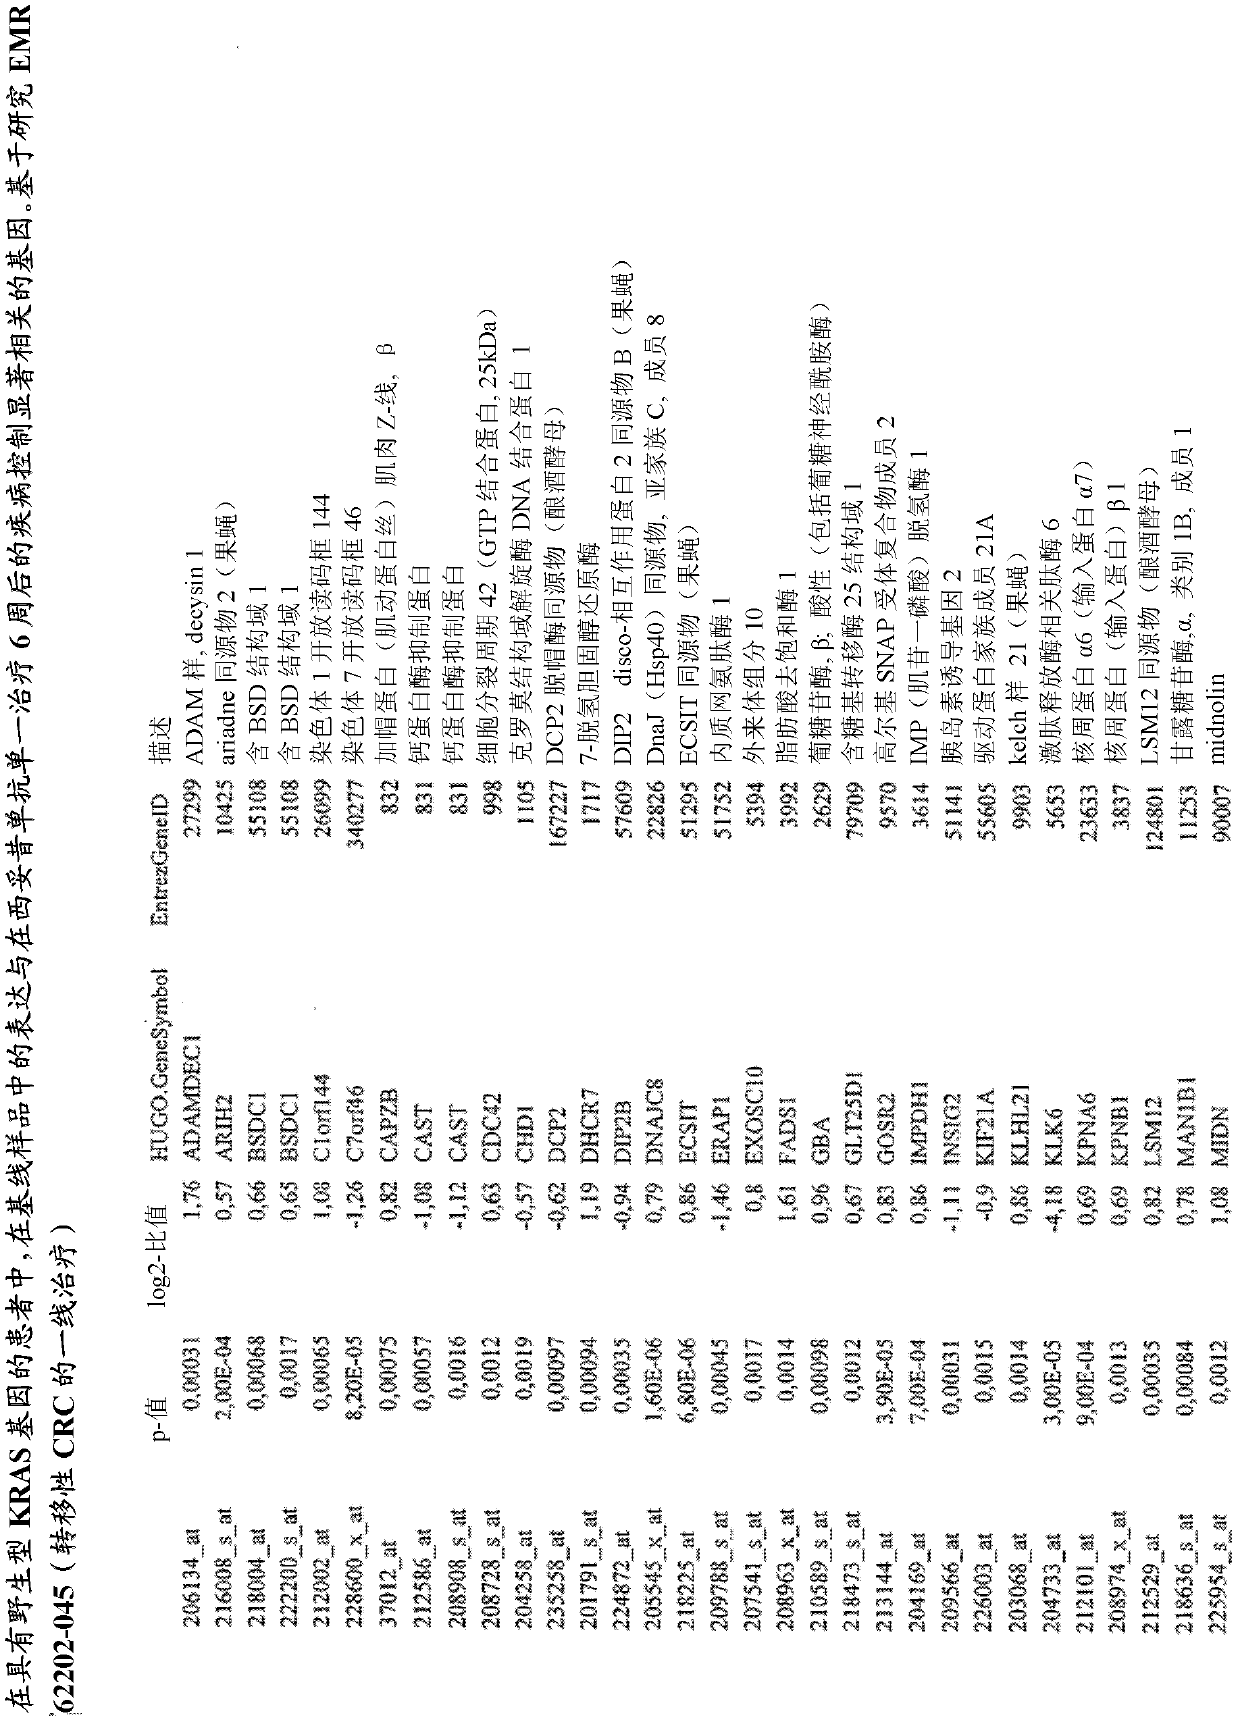 Biomarkers and methods for determining efficacy of anti-egfr antibodies in cancer therapy